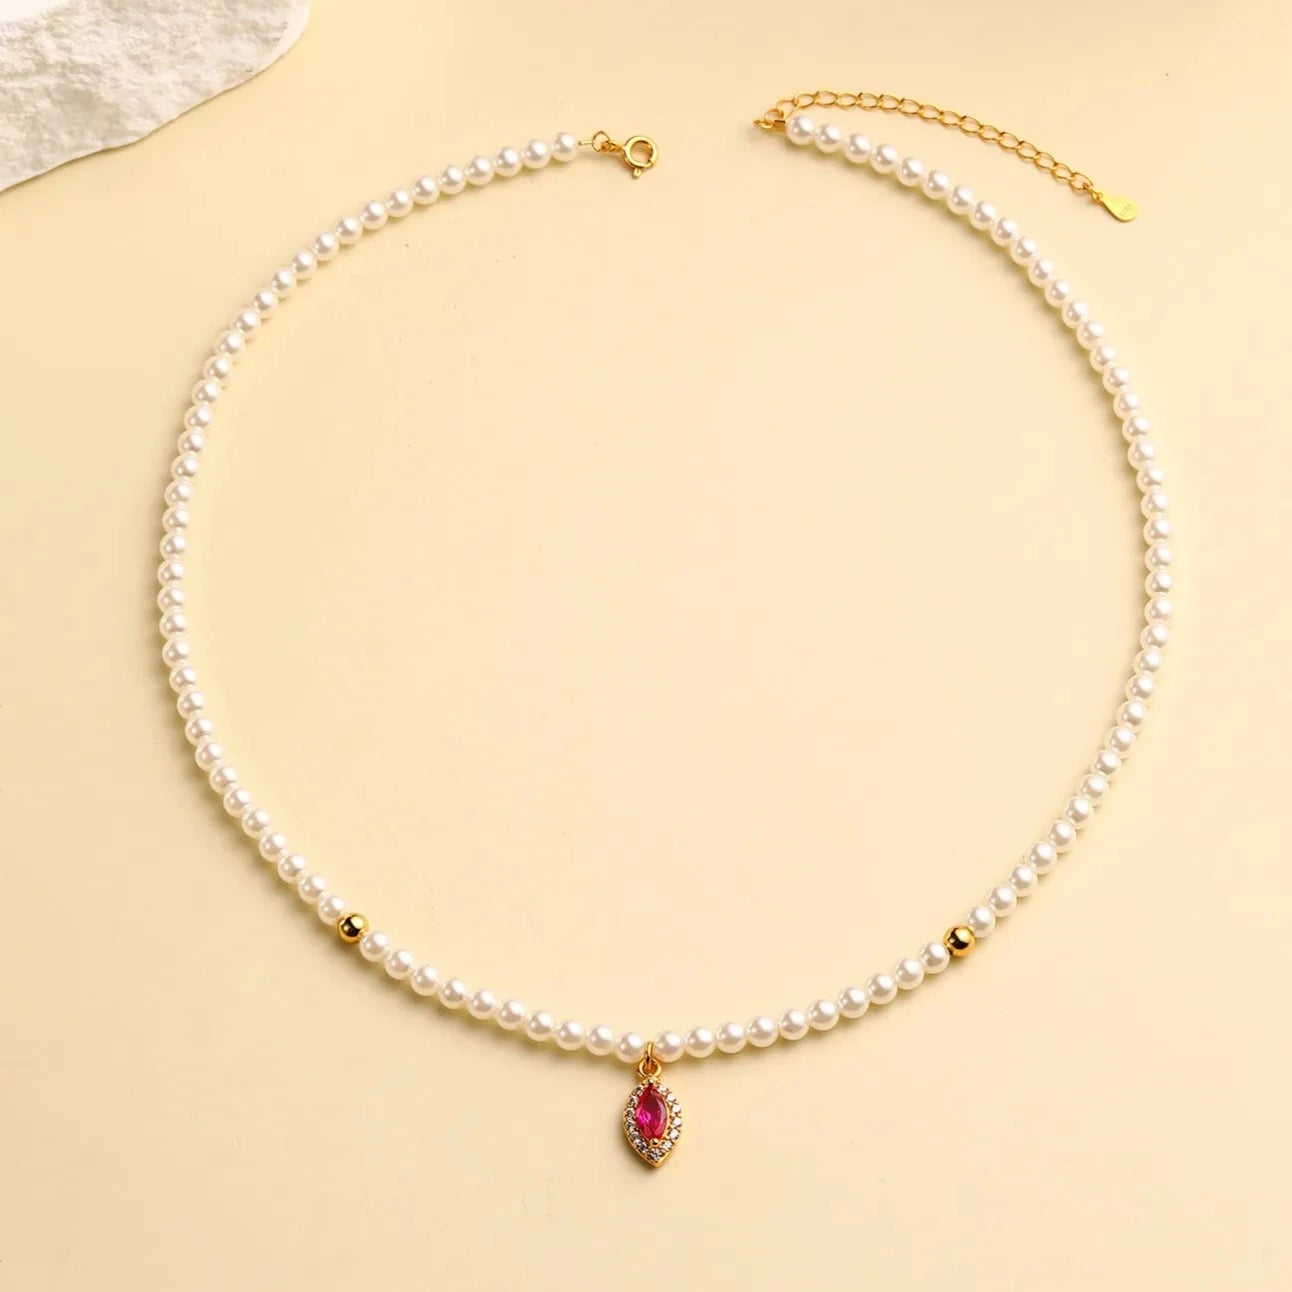 Luxe Oval Ruby Gemstone Pearl Necklace